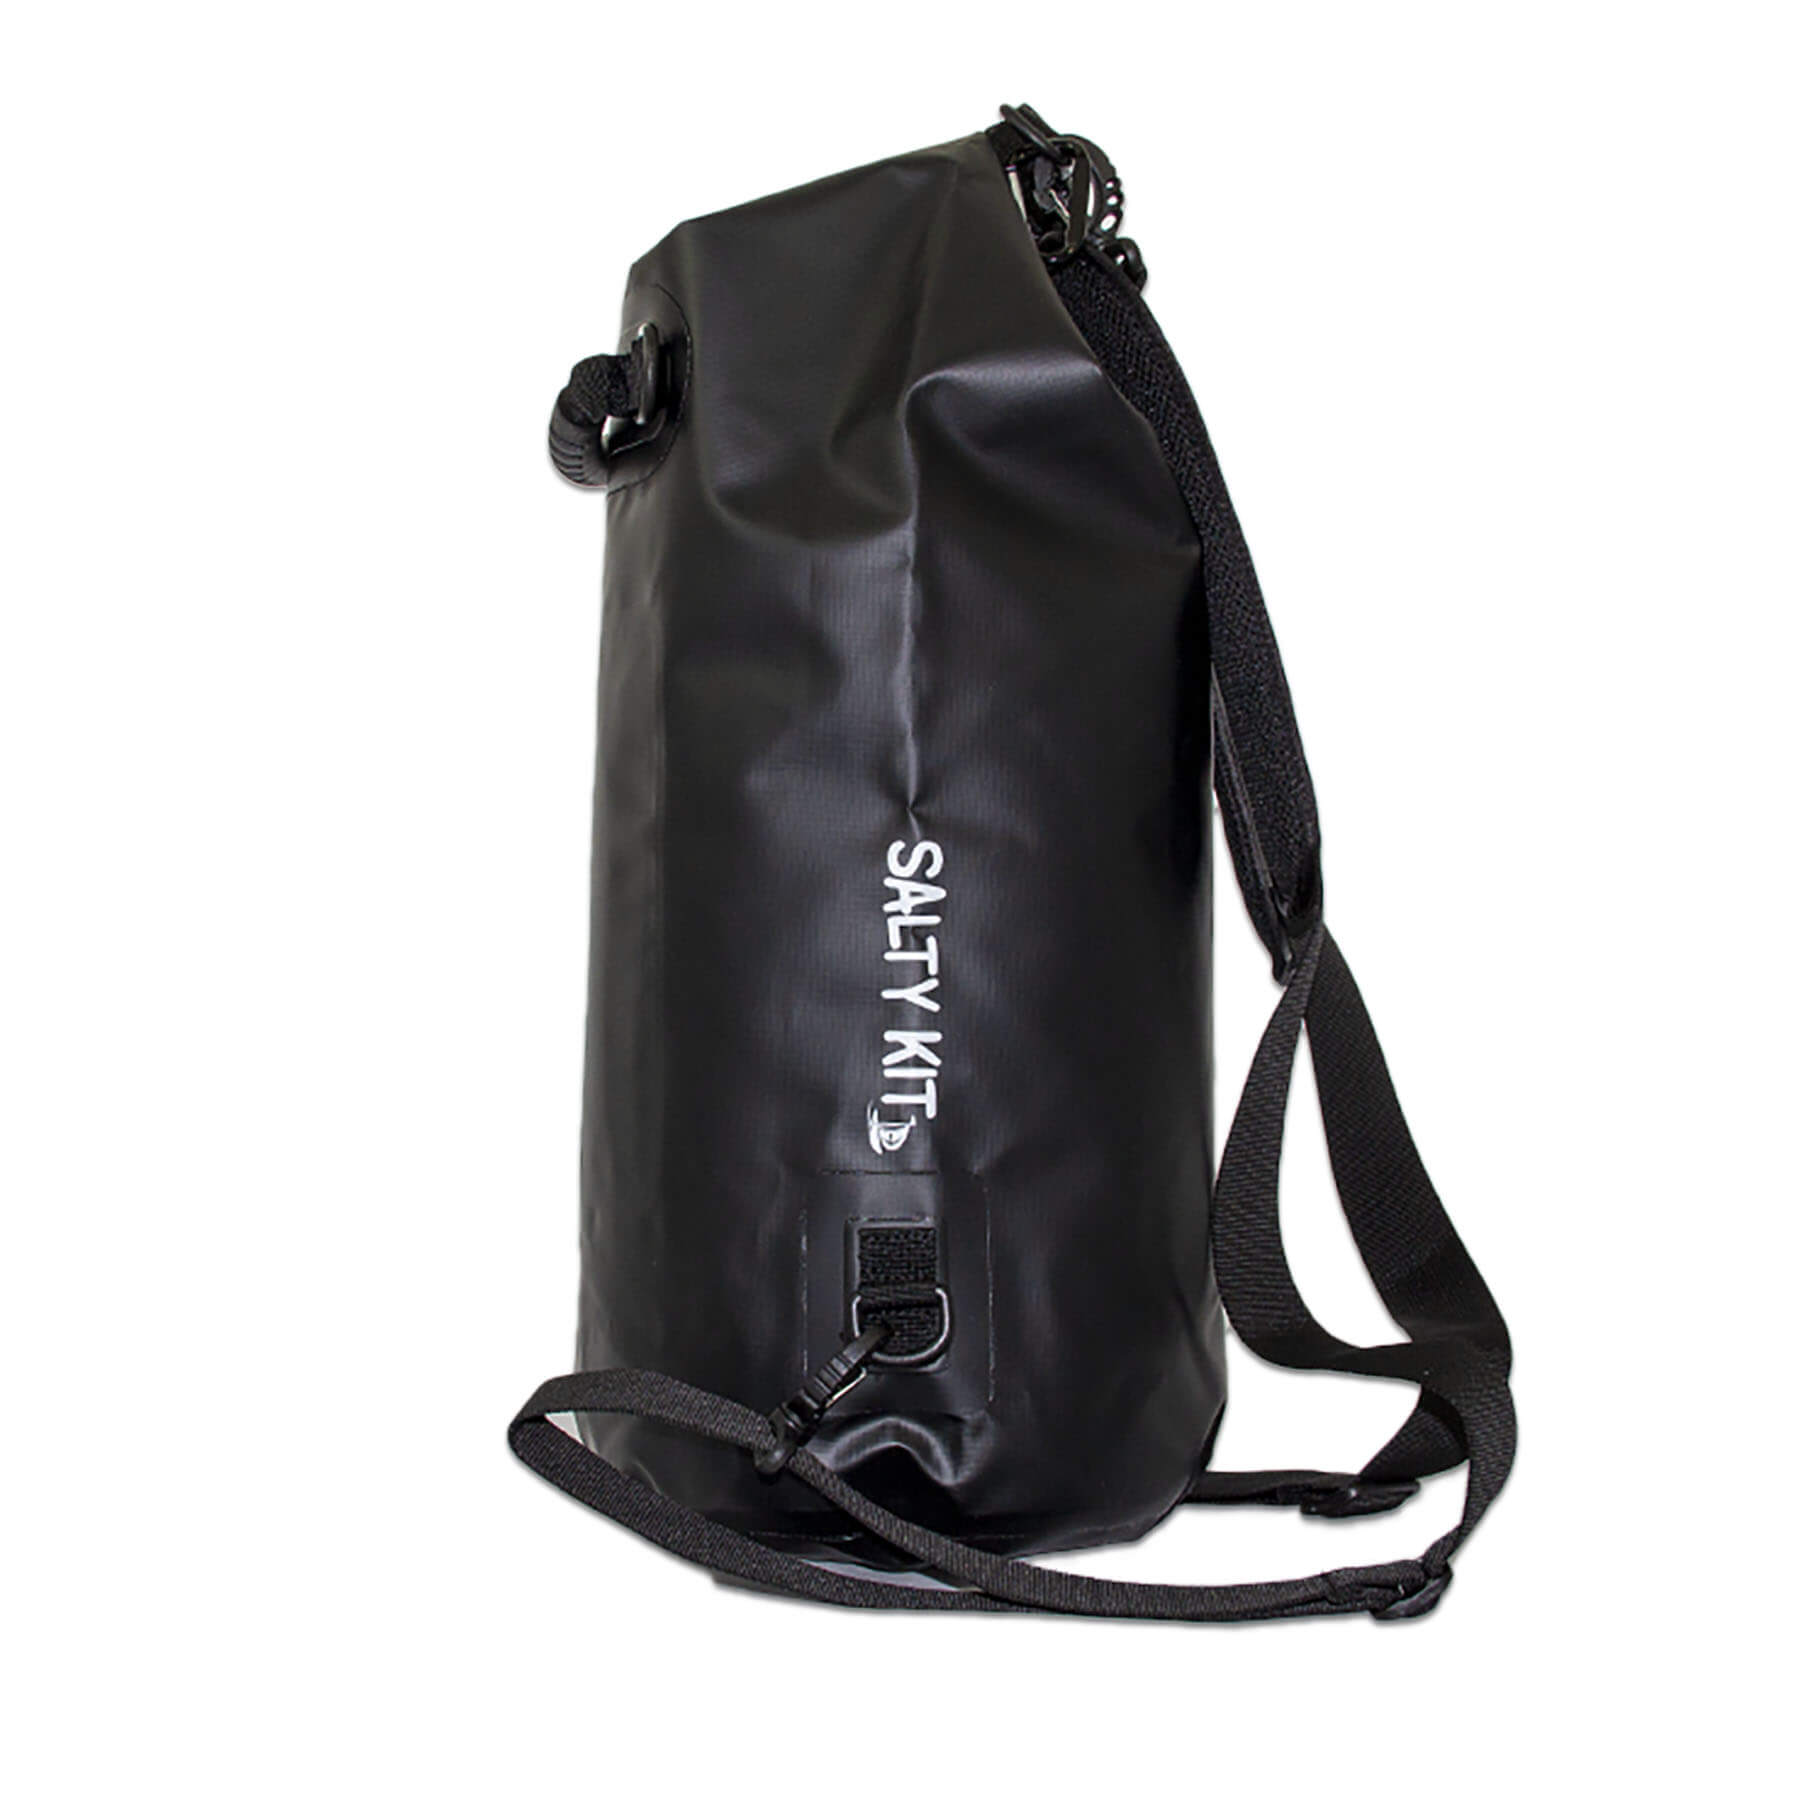 waterproof dry bag 20 litres with detachable comfort straps, D rings and handle in black side view